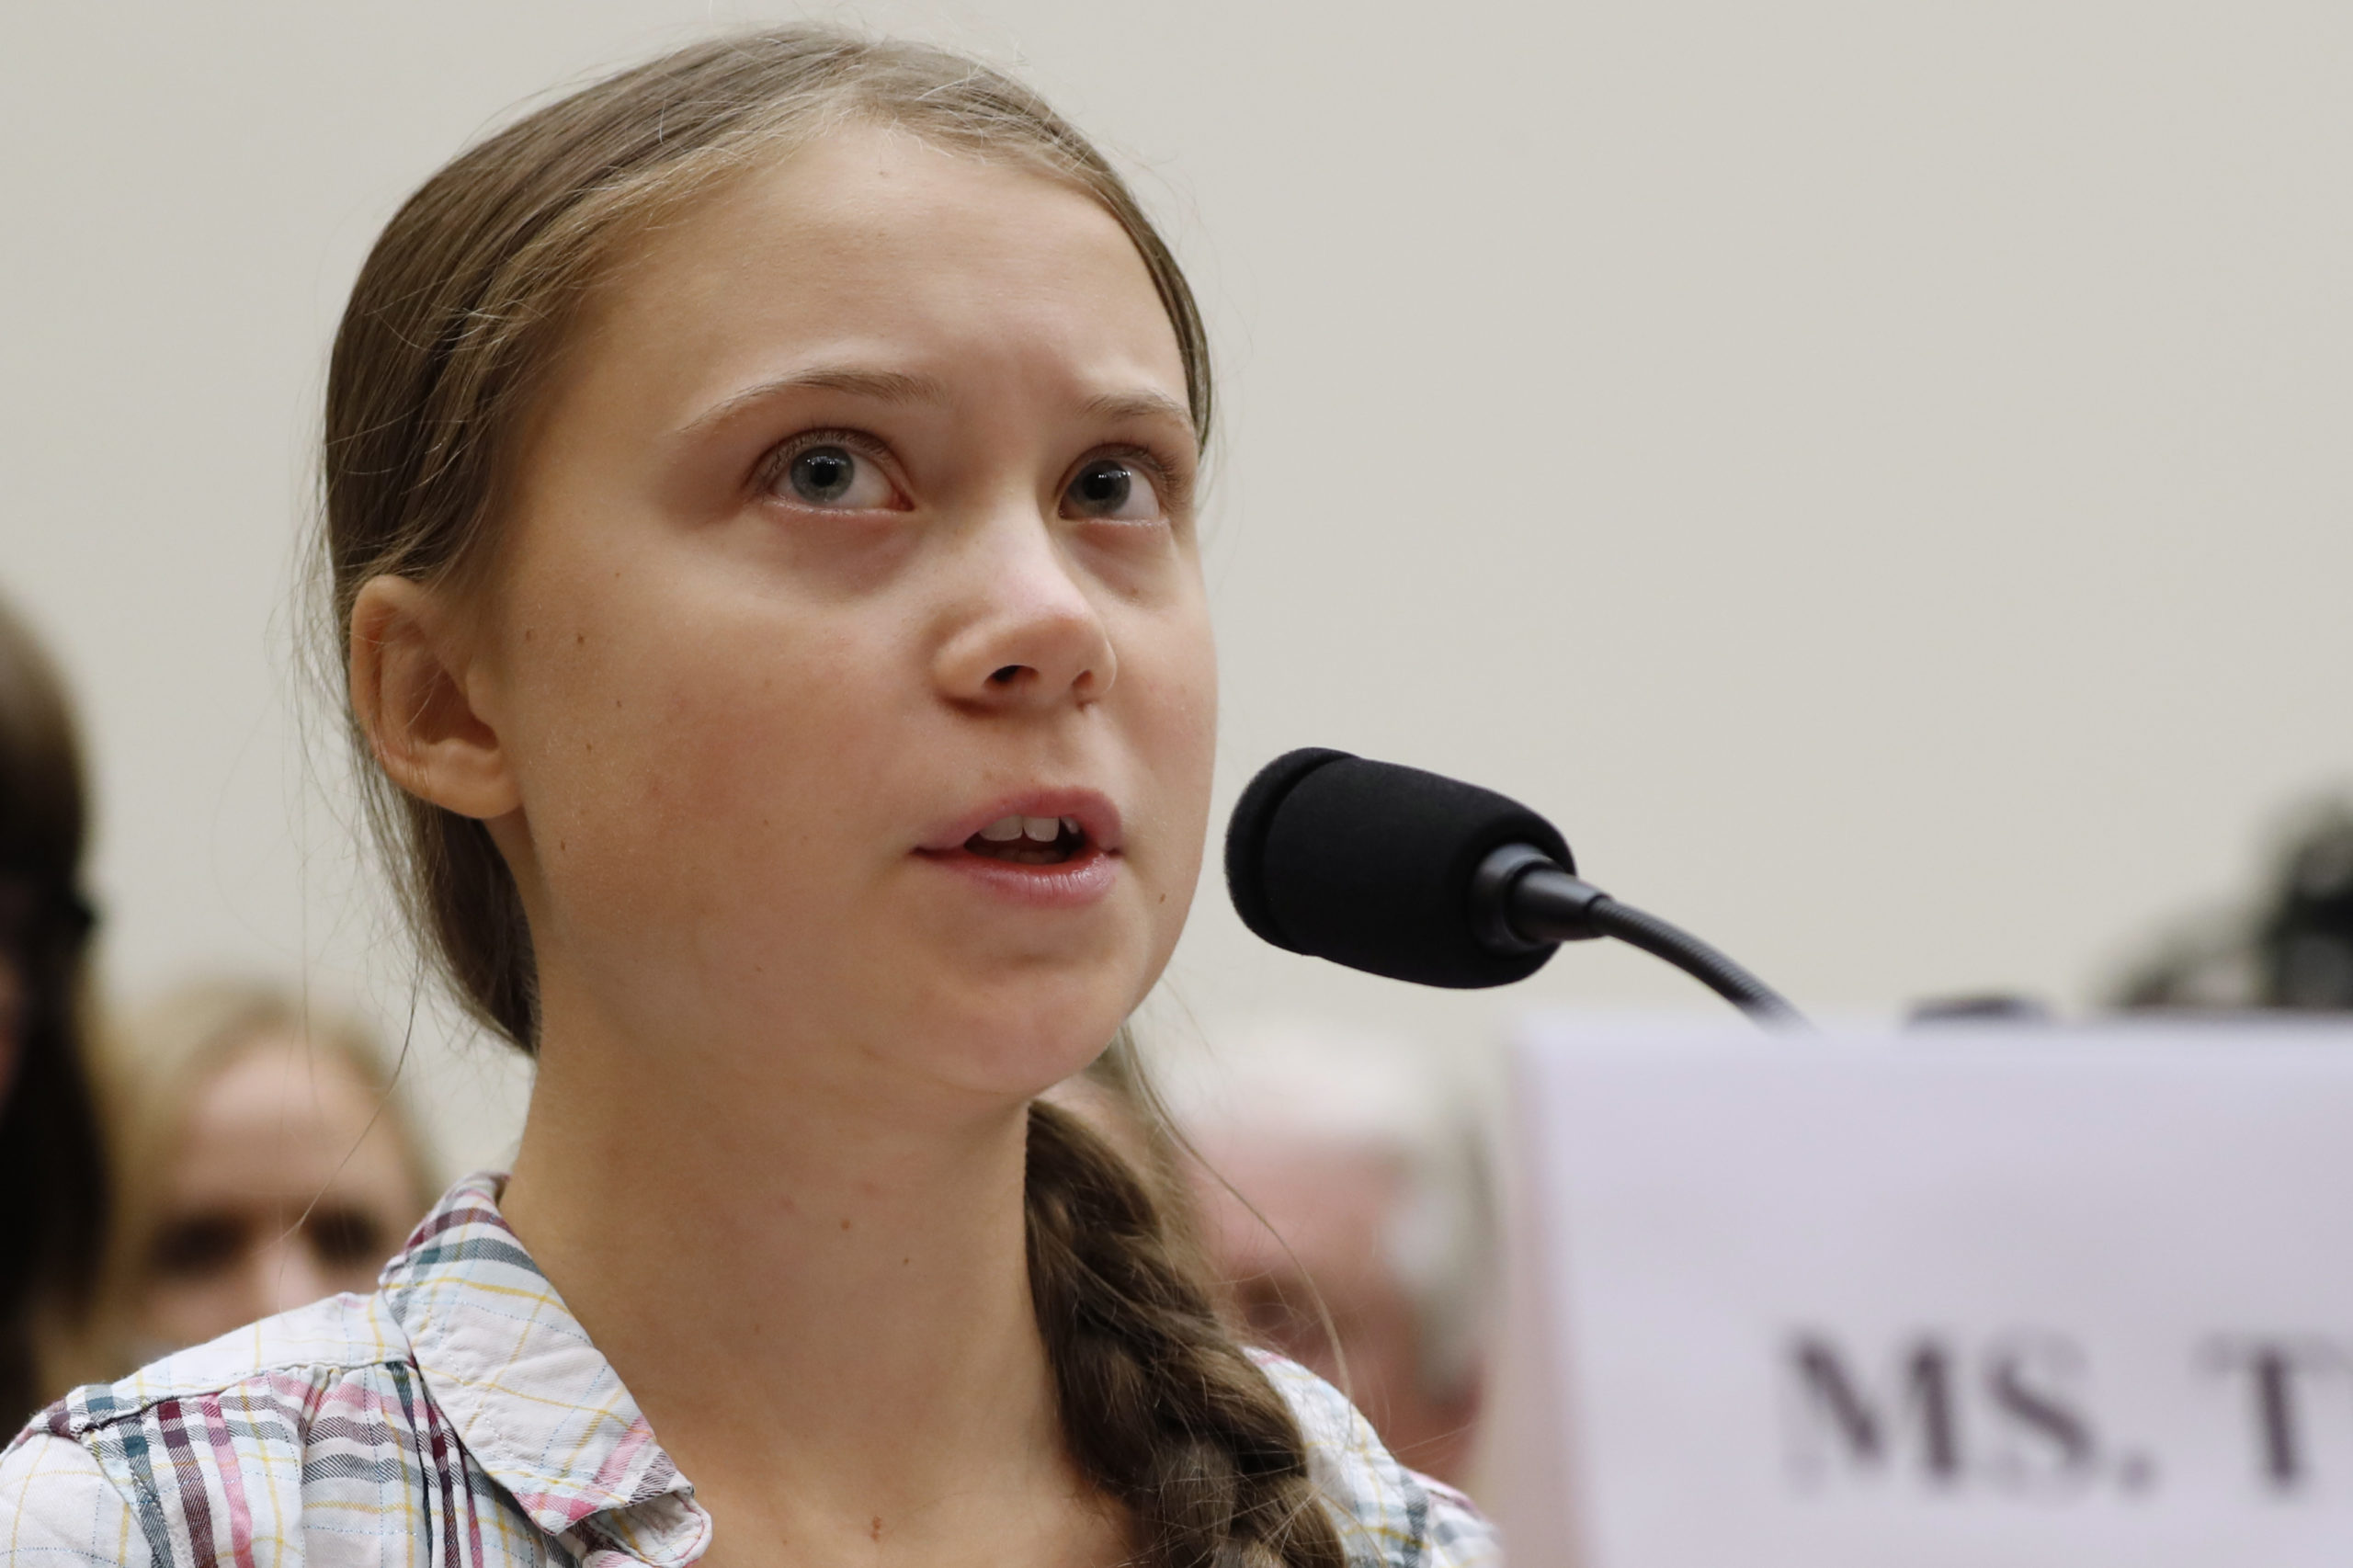 Greta Thunberg donating $100,000 to help children affected by ...